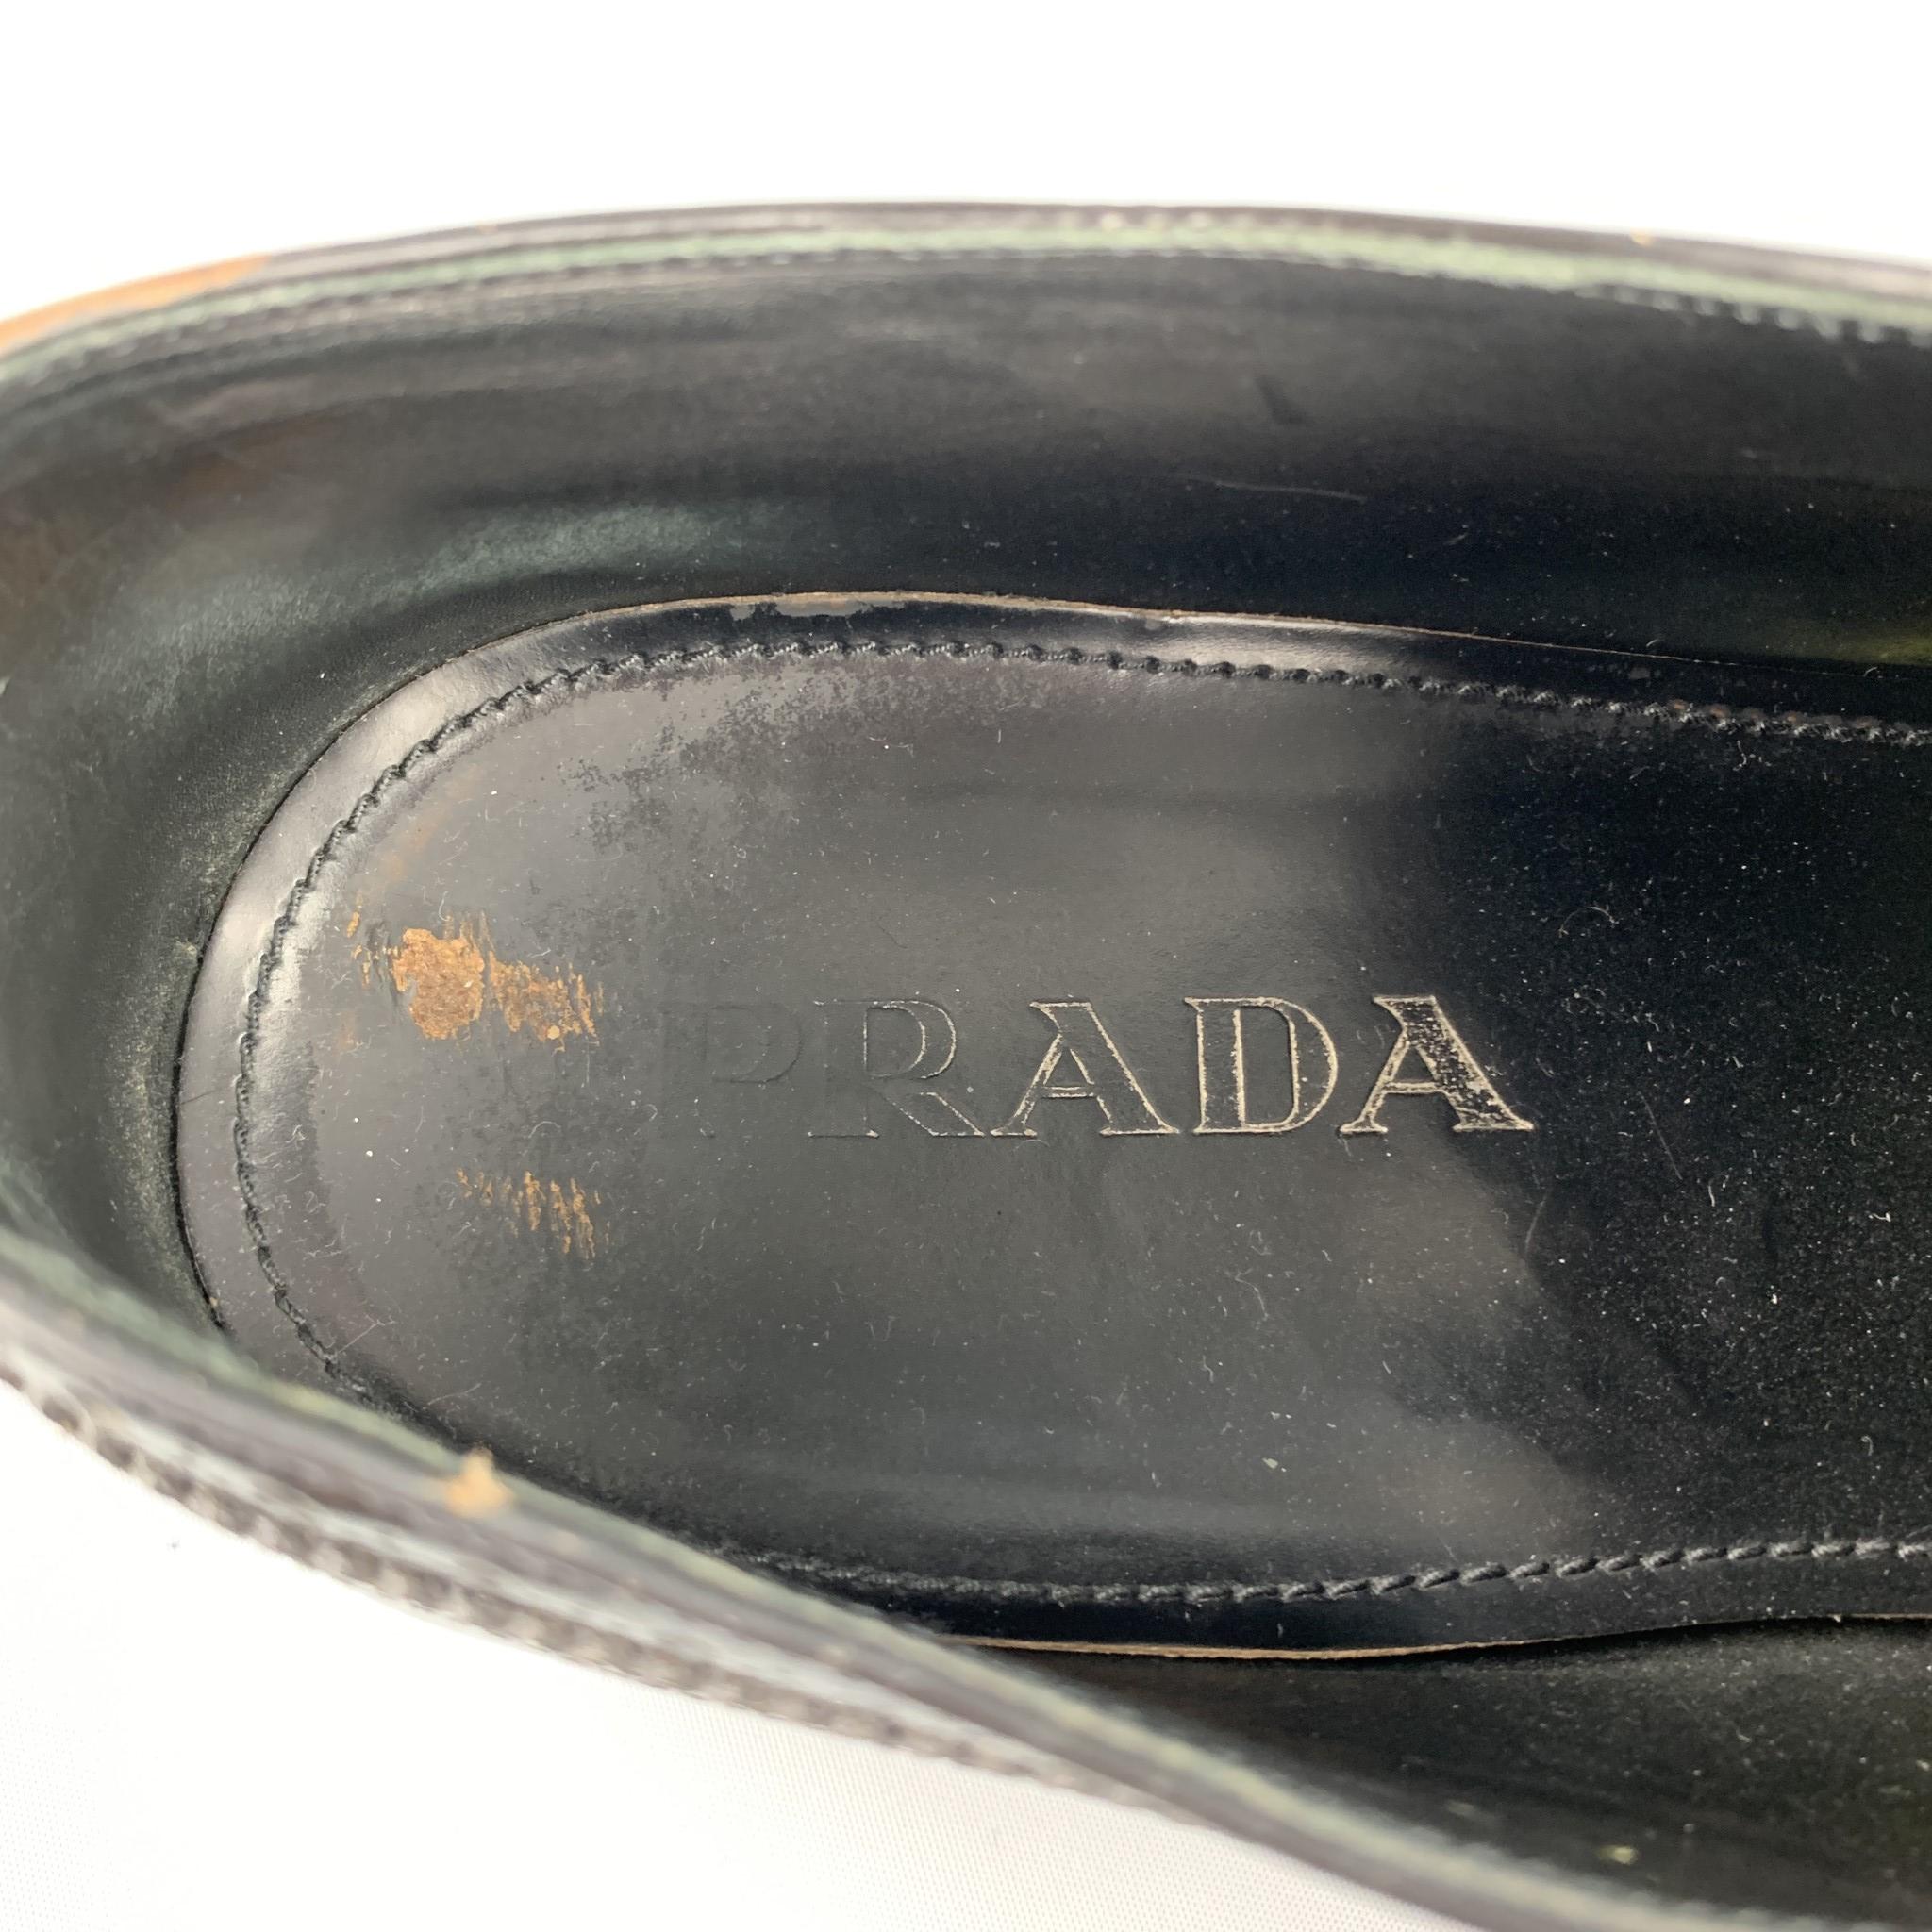 PRADA Size 10.5 Black Perforated Leather Platform Lace Up Shoes 2